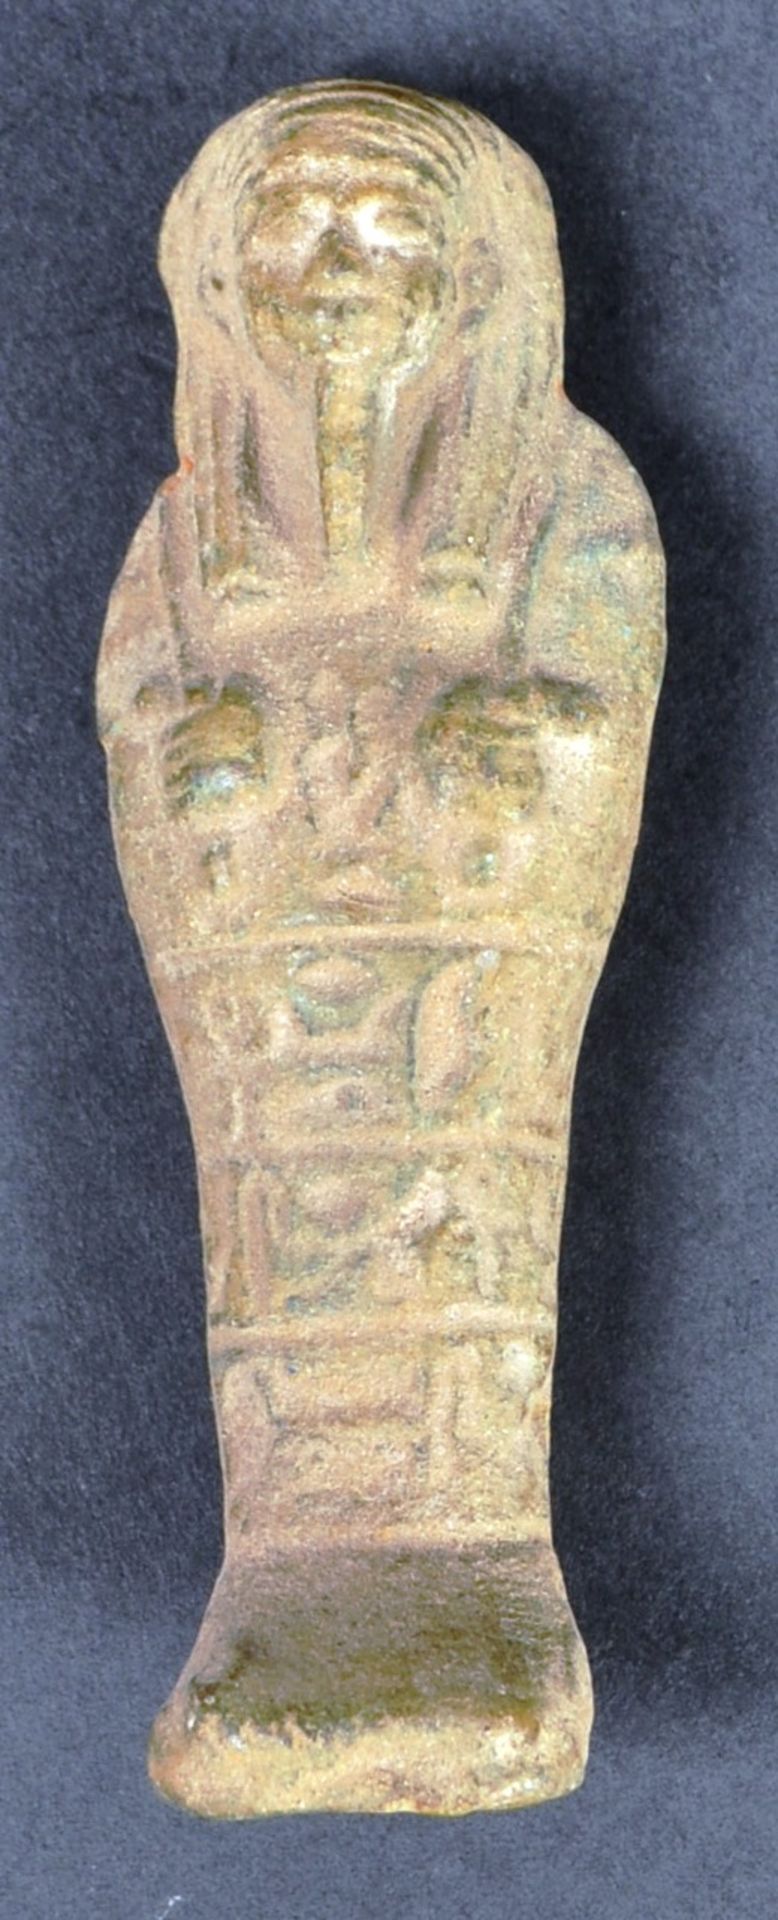 COLLECTION OF EGYPTIAN SHABTI MUMMY FIGURINES - Image 5 of 6